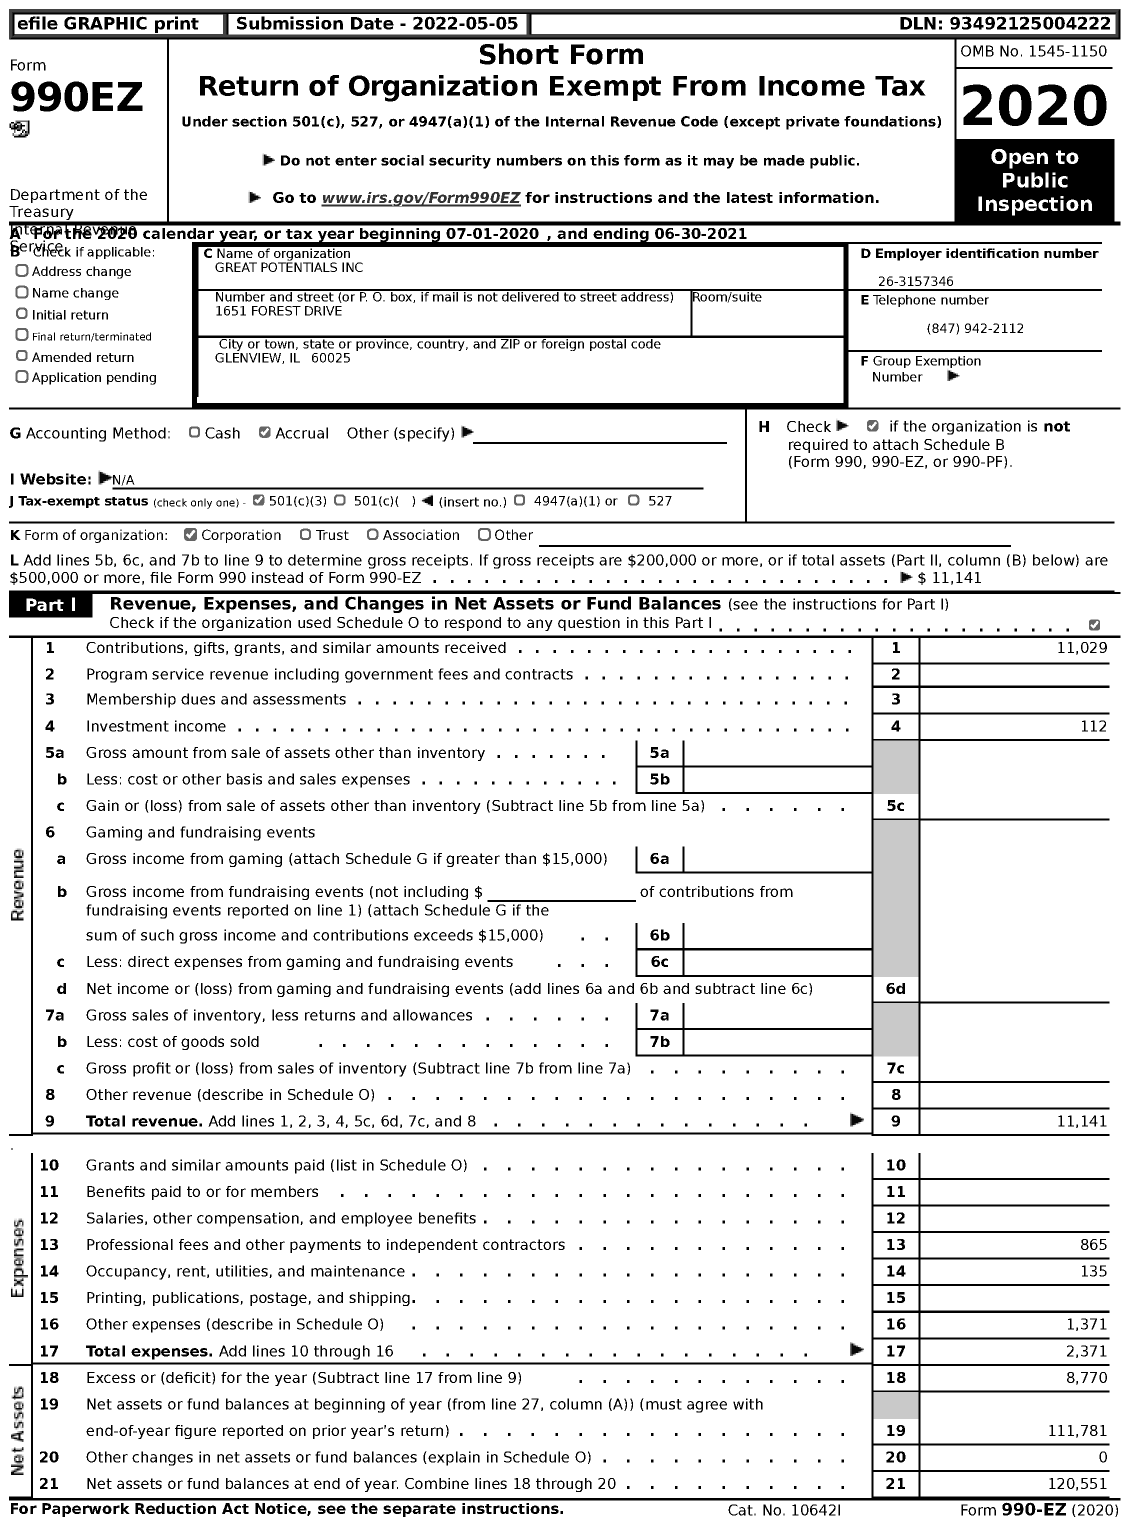 Image of first page of 2020 Form 990EZ for Great Potentials